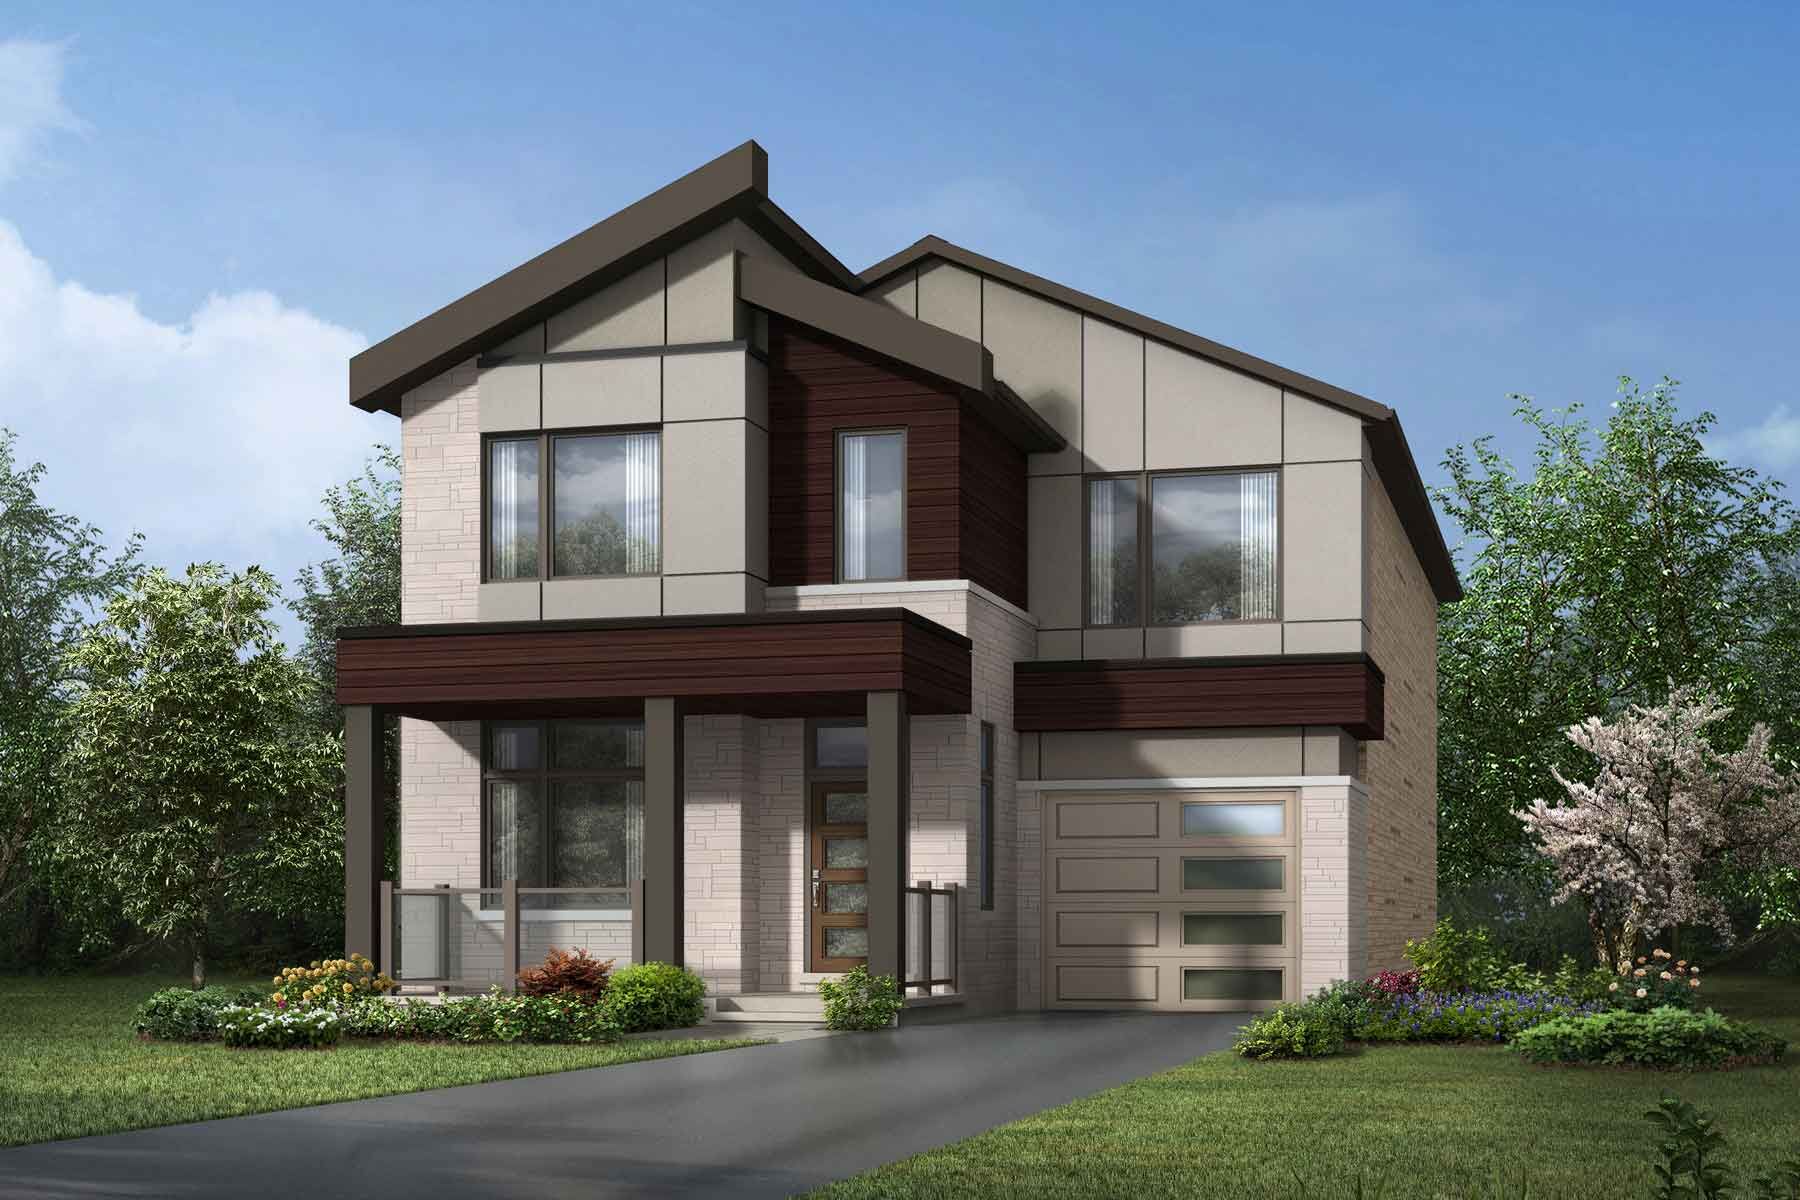 A contemporary style elevation with a single car garage and a slanted roof top.